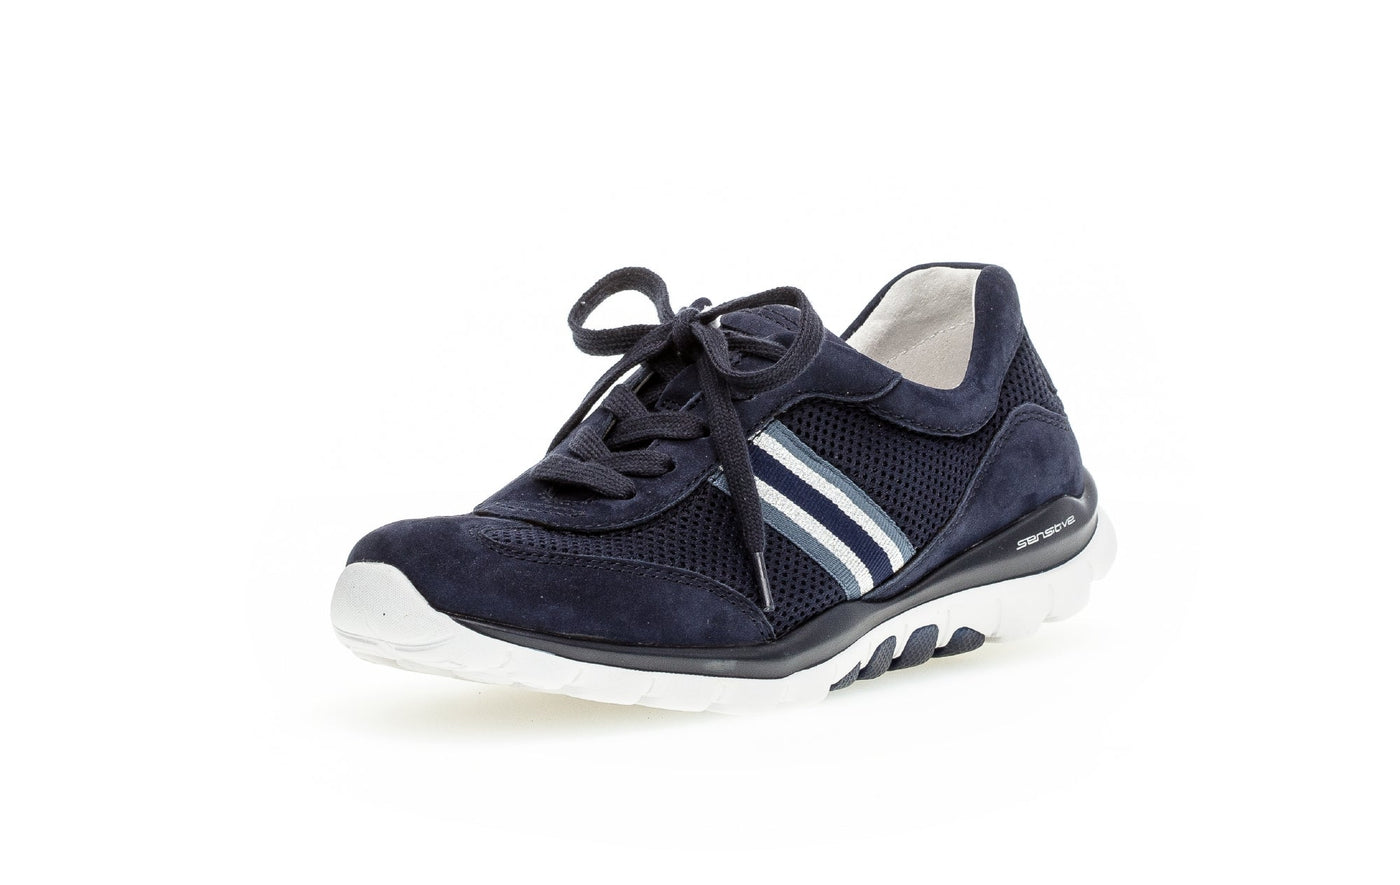 GABOR - 86.966.16 LACED ROLLING SOFT FASHION RUNNER - NAVY